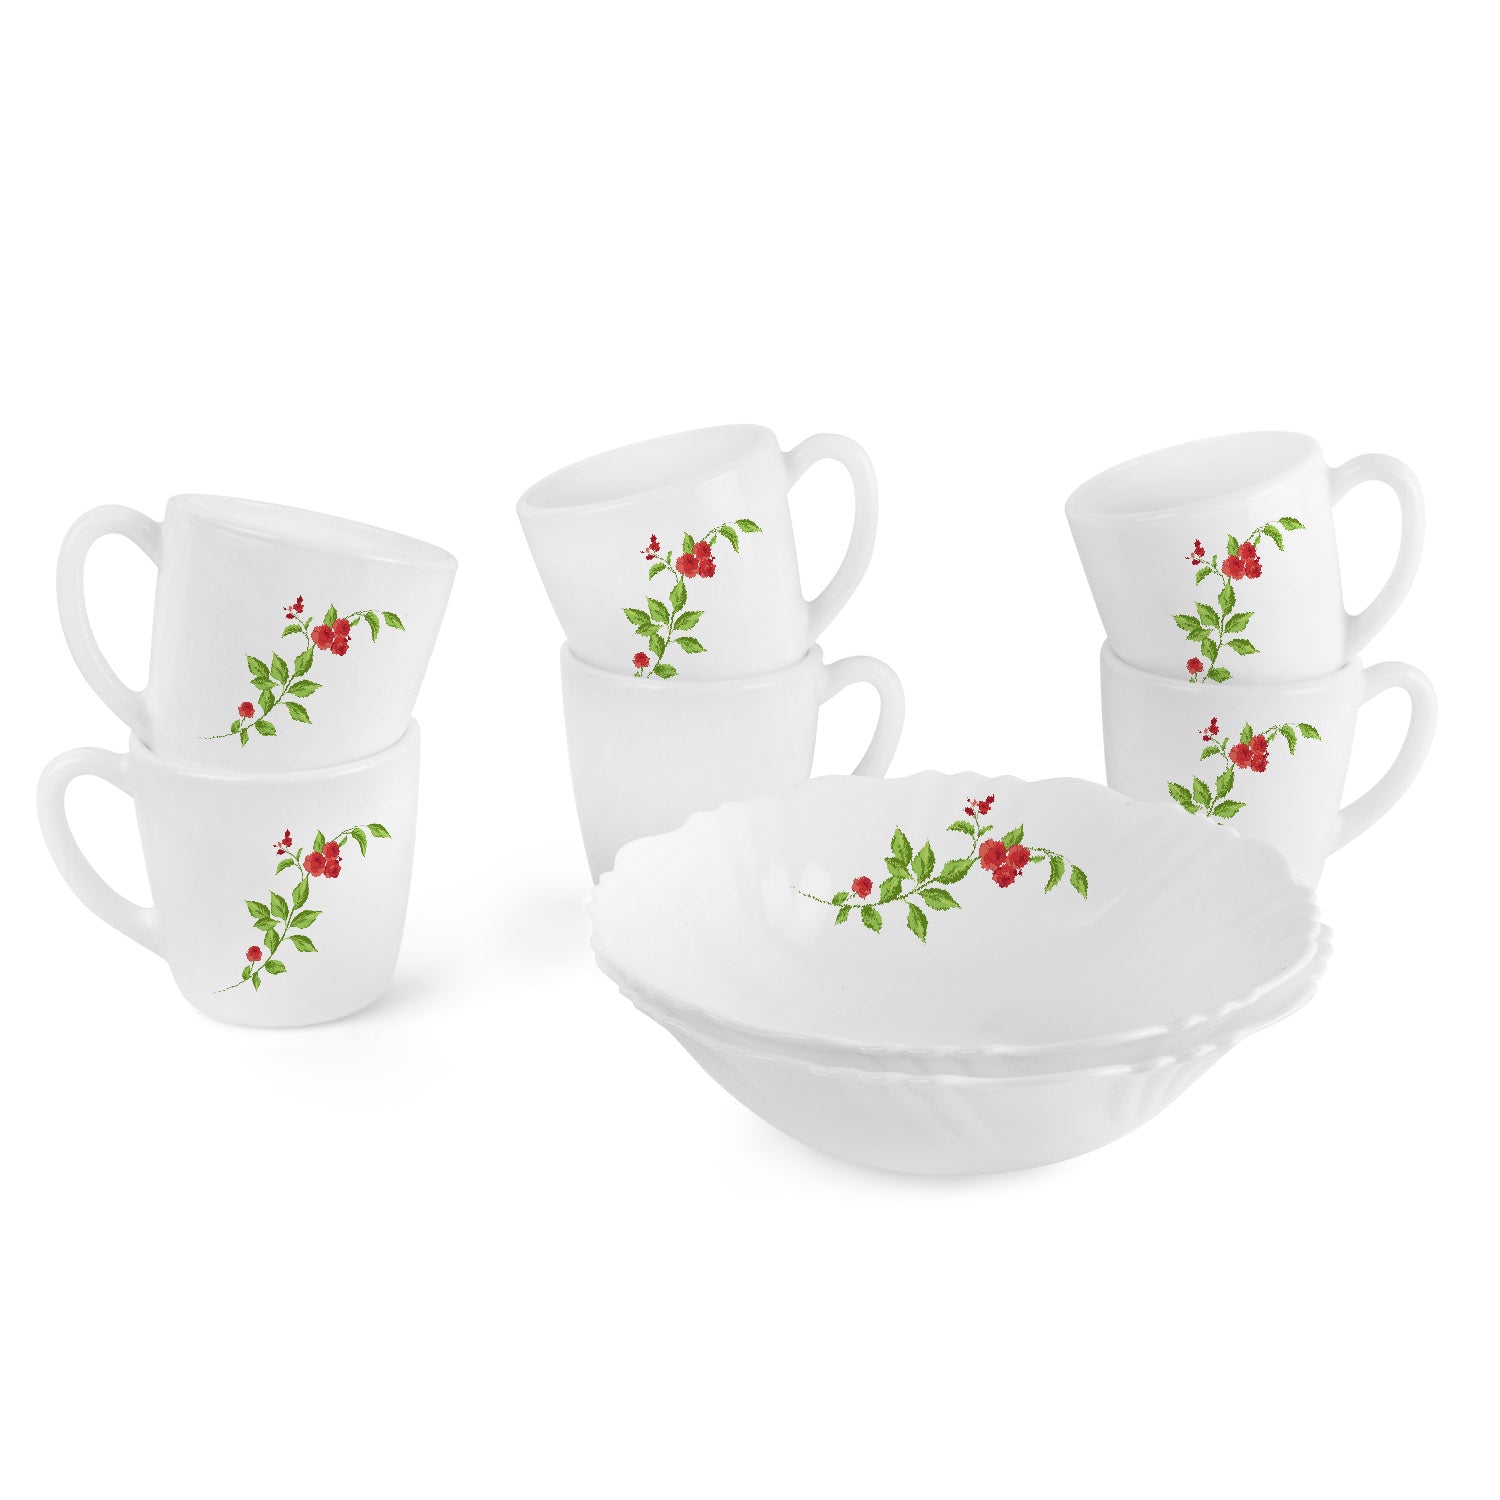 Imperial Series Quick Bite Bowl & Mug Gift set, 8 Pieces Imperial Rose / 8 Pieces